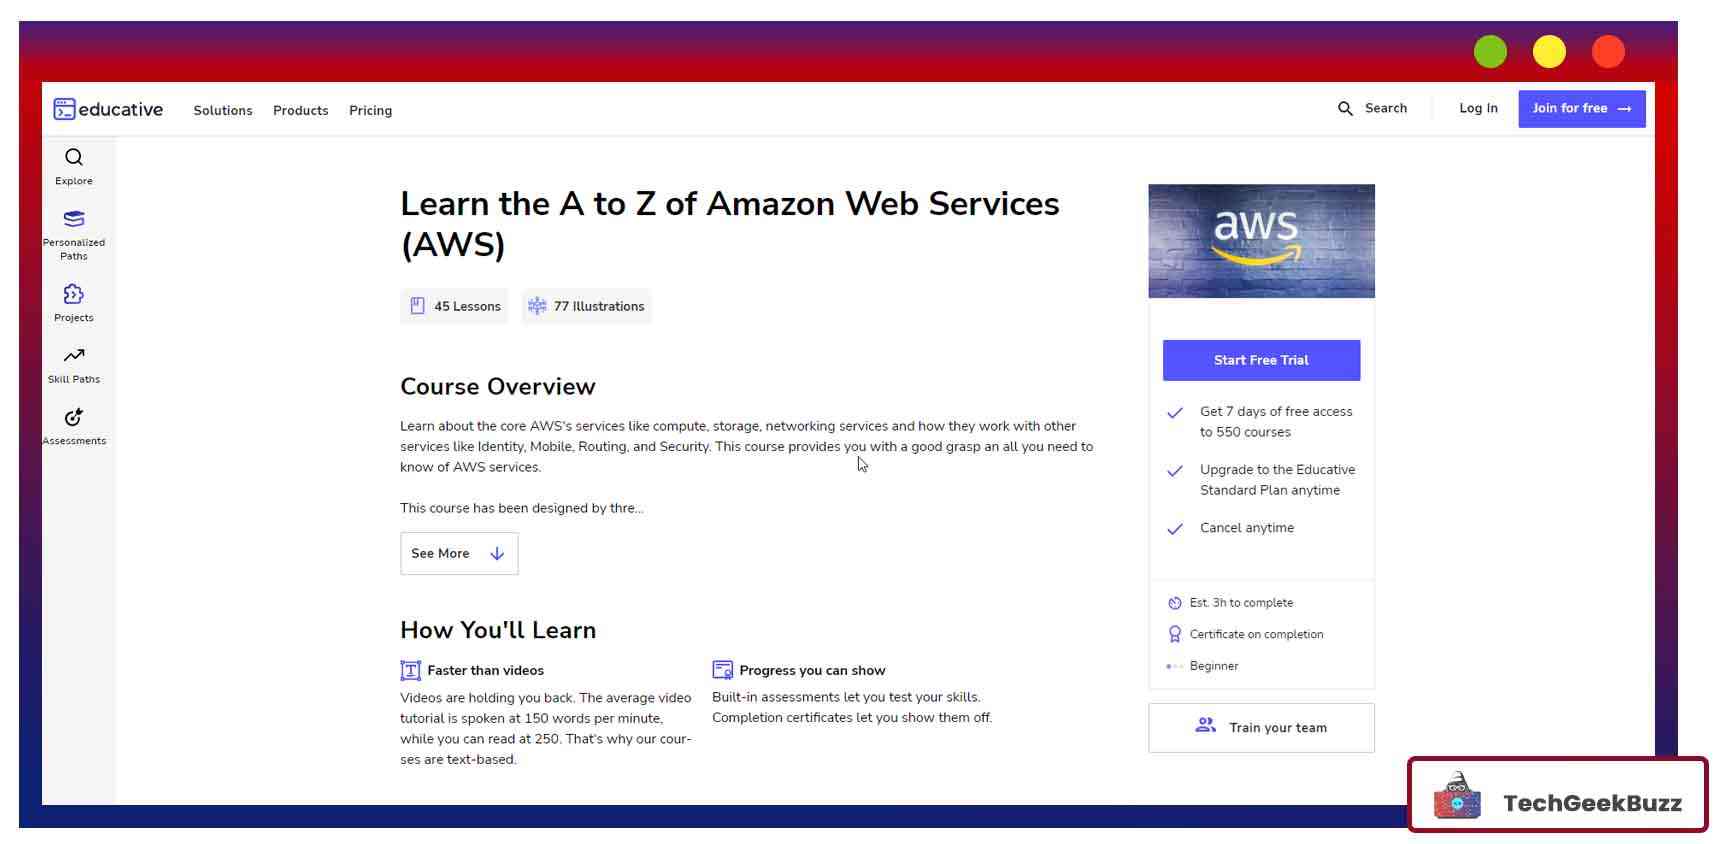 Learn the A to Z of Amazon Web Services (AWS)